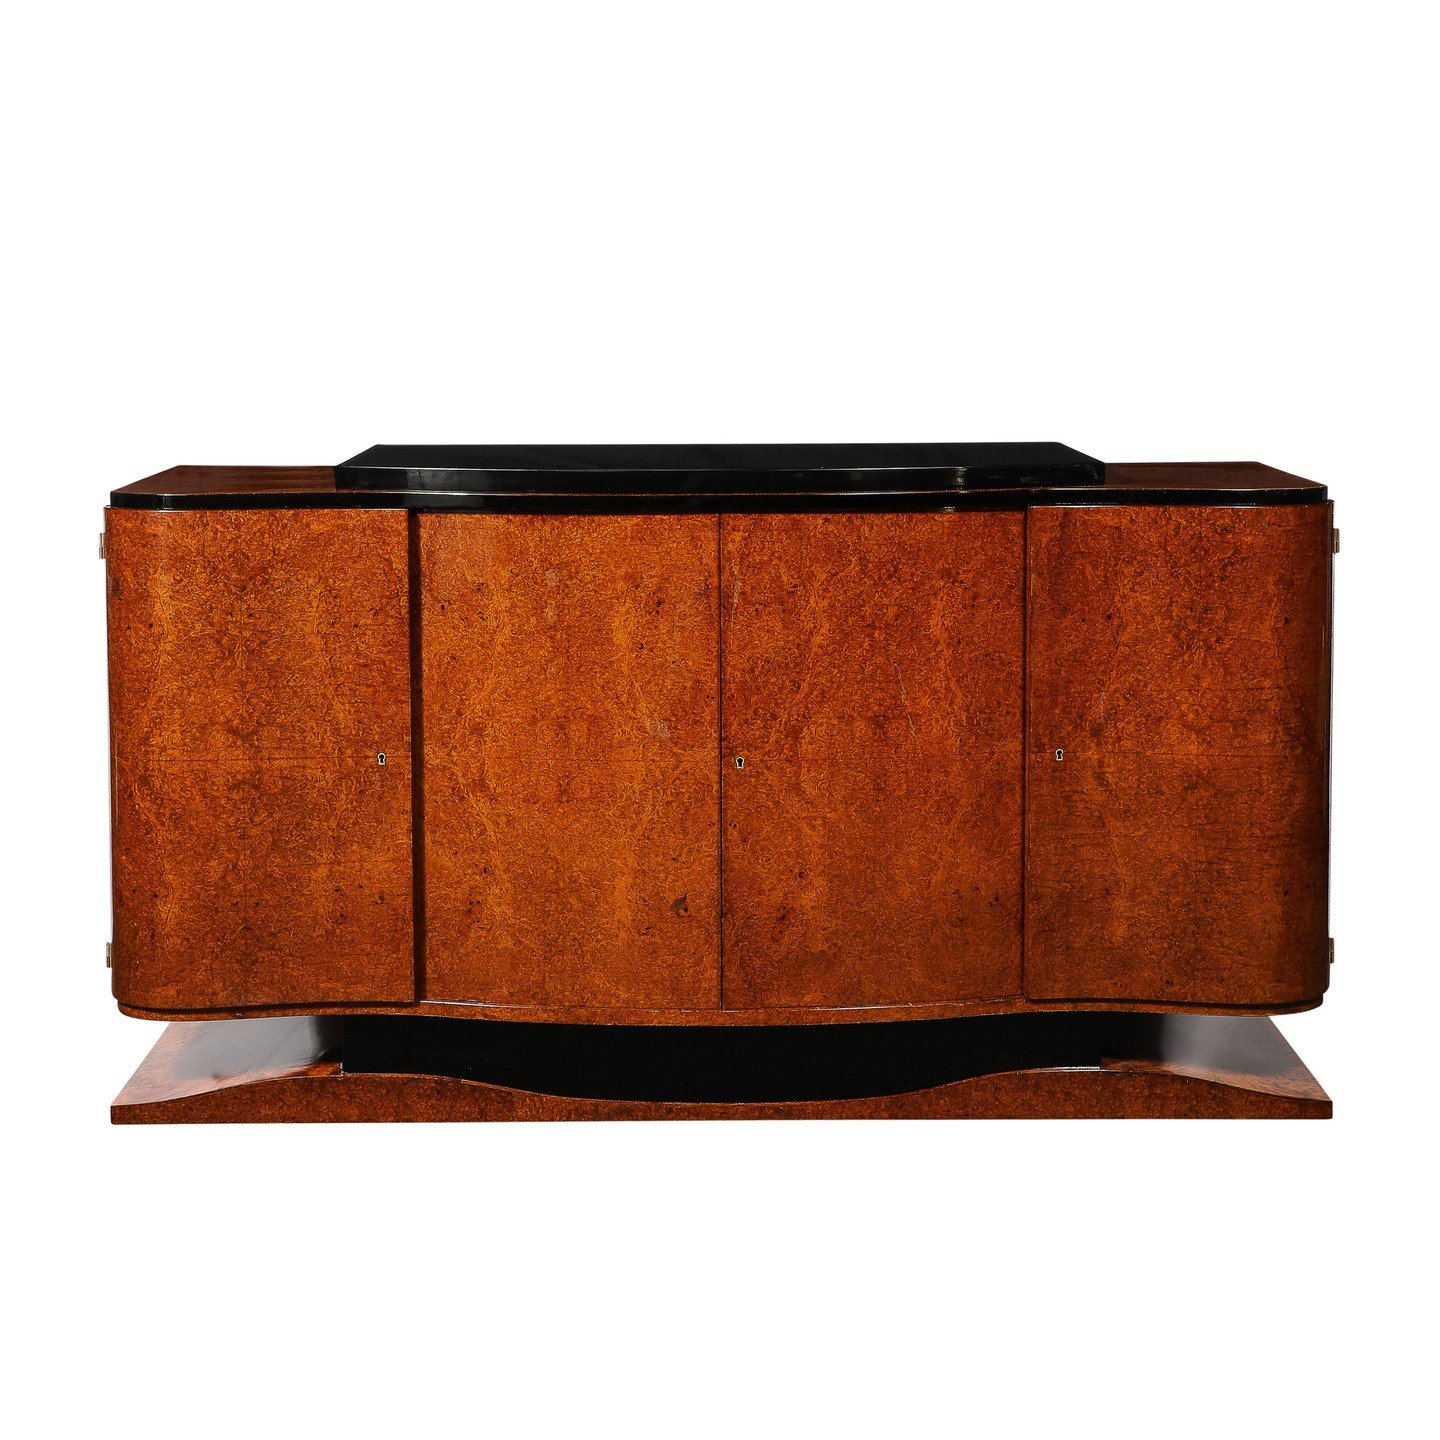 Art Deco Sideboard in Burled &amp; Bookmatched Amboyna Wood w/ Black Lacquer Detail

This elegant and exquisitely made Art Deco Sideboard in Burled and Bookmatched Amboyna Wood W/ Black Lacquer Detailing and Plinth Base originates from France, Circa 